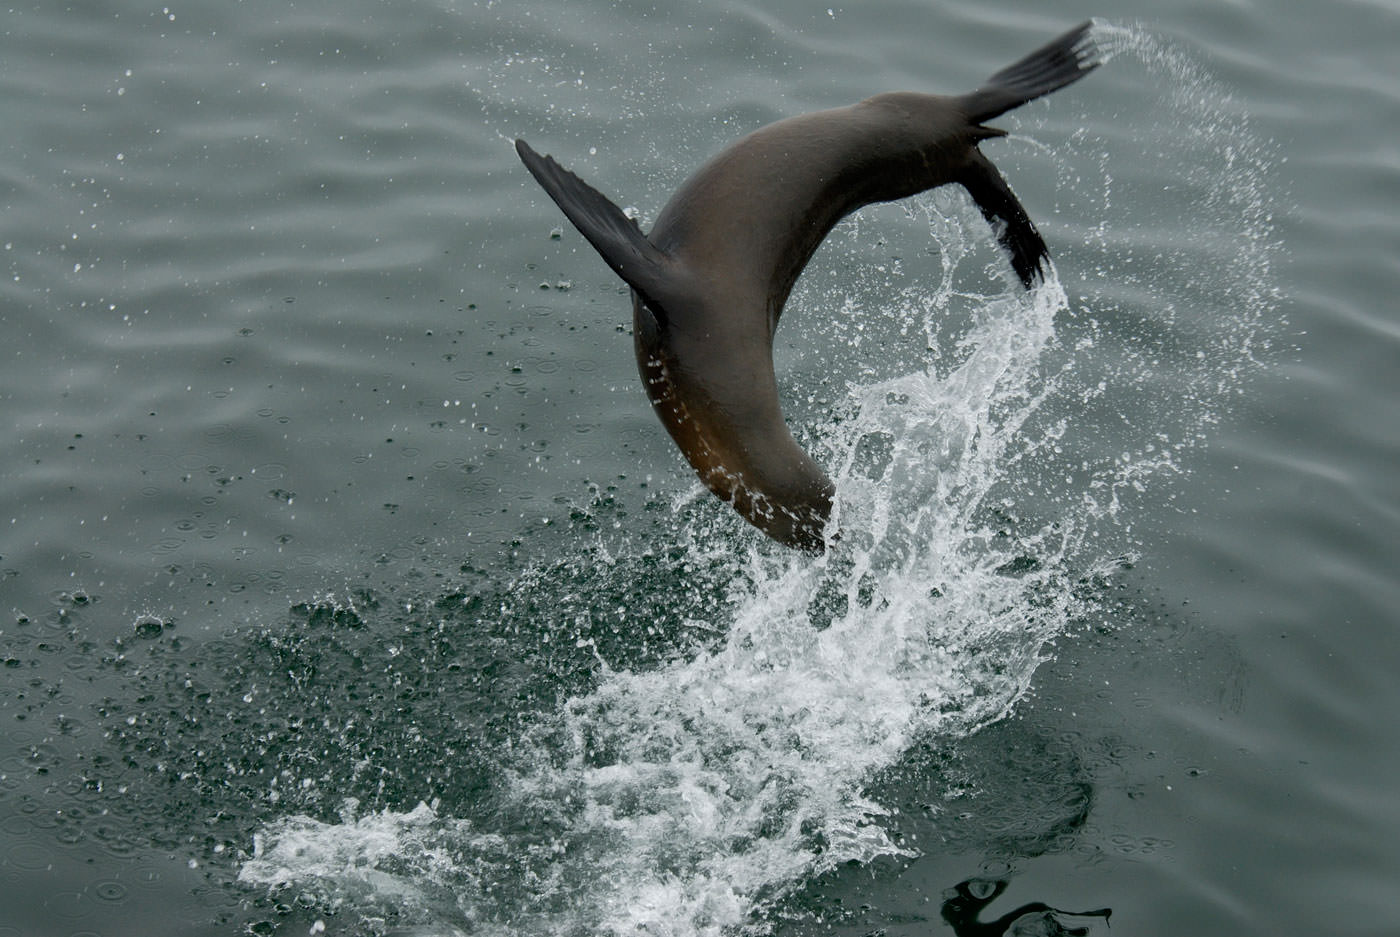 A sea lion does a backflip out of the water